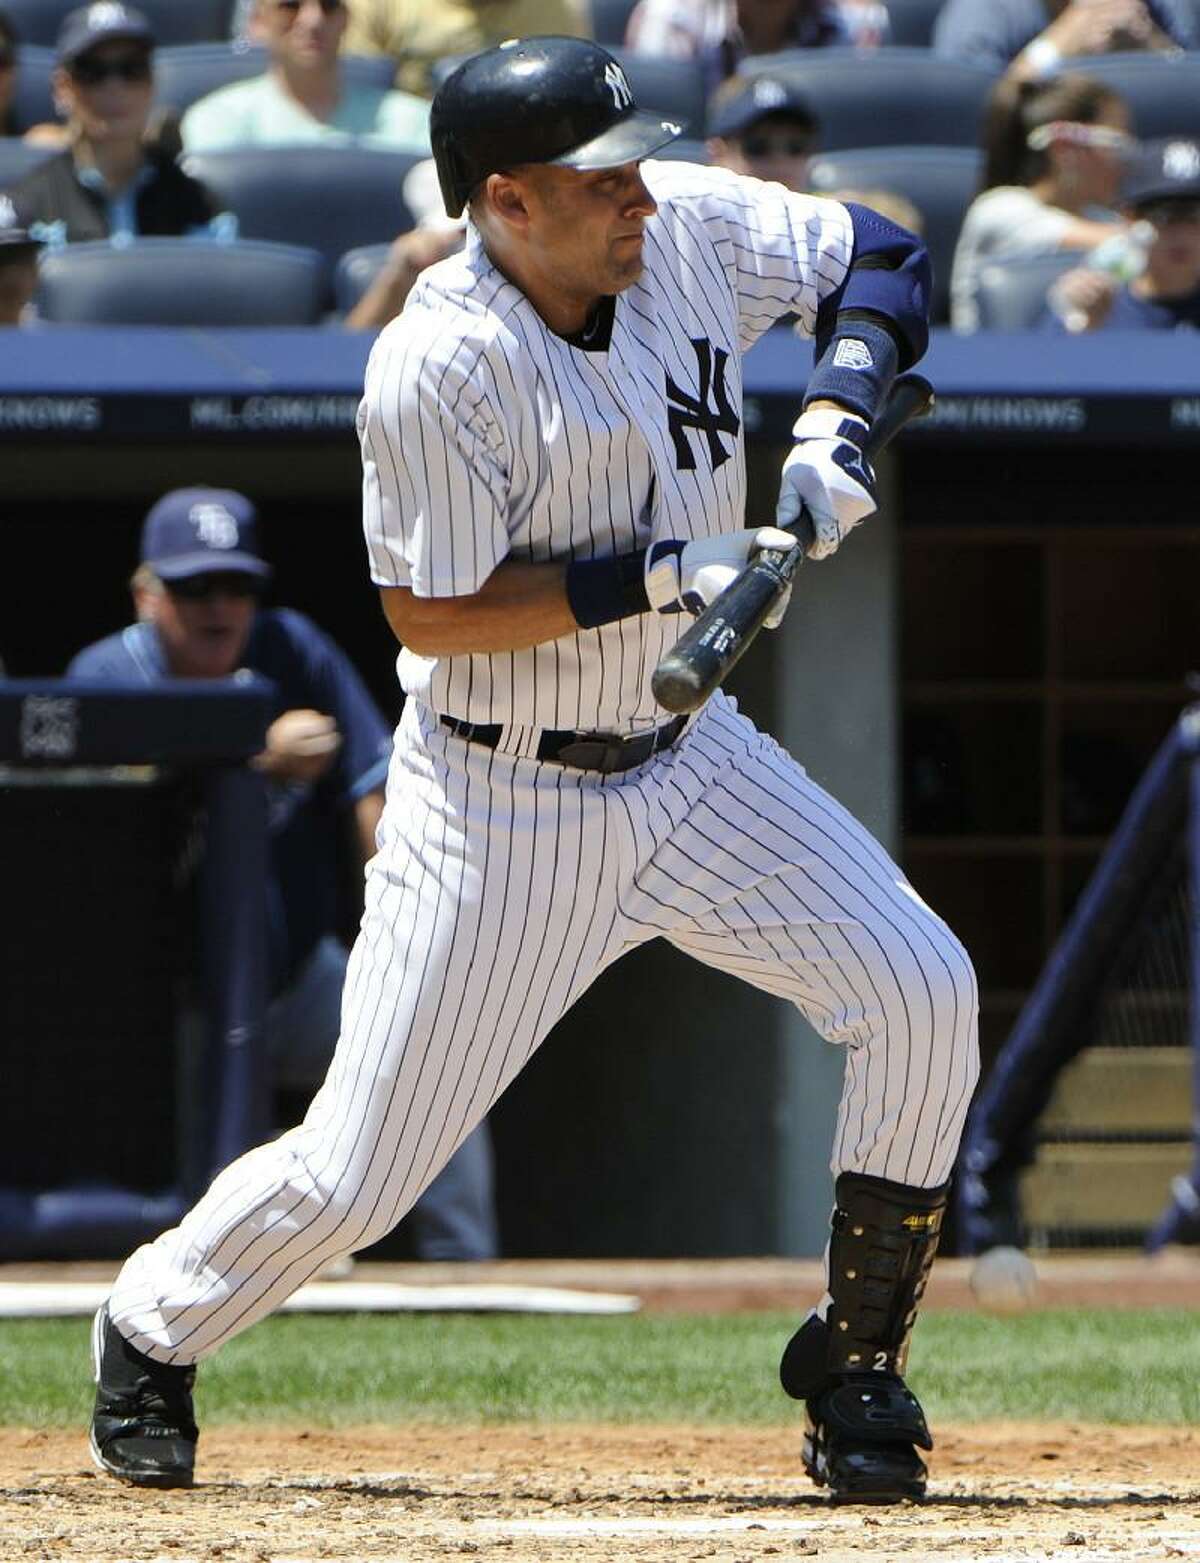 Jeter goes 5-for-5, gets 3,000th hit in dramatic fashion